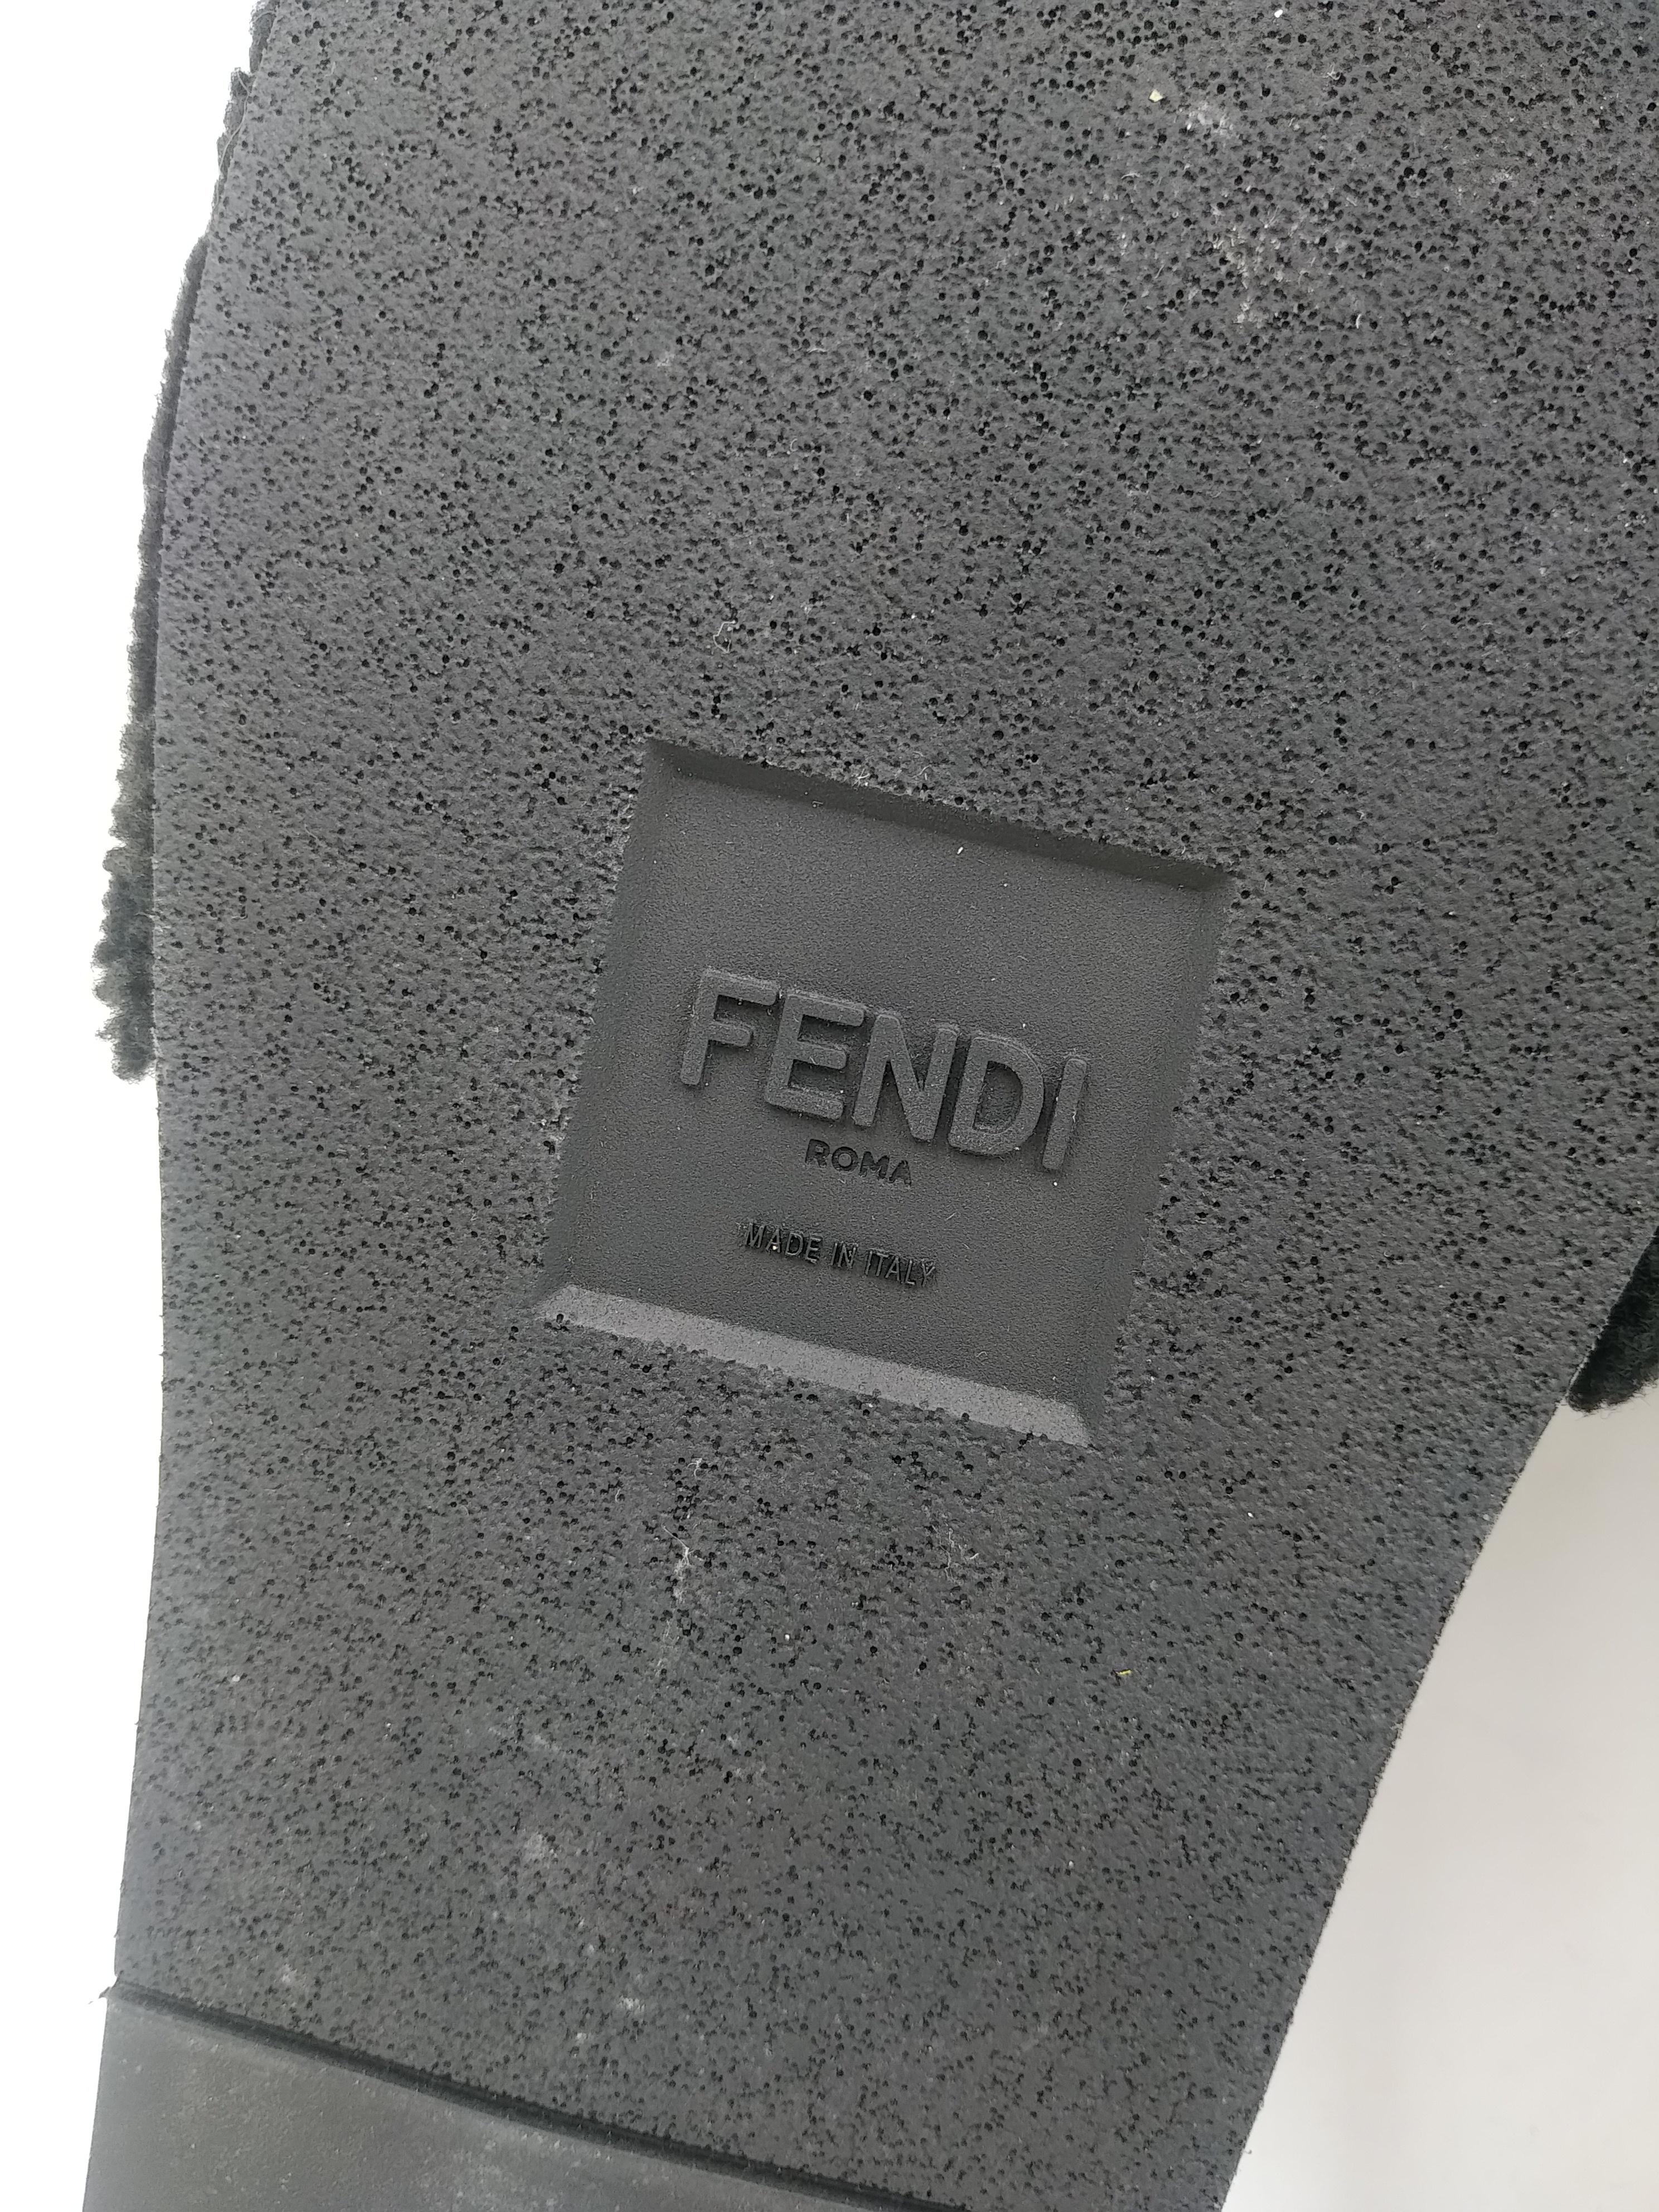 Fendi leather and fur slides slippers, size EU 41 In Good Condition For Sale In Lugano, Ticino